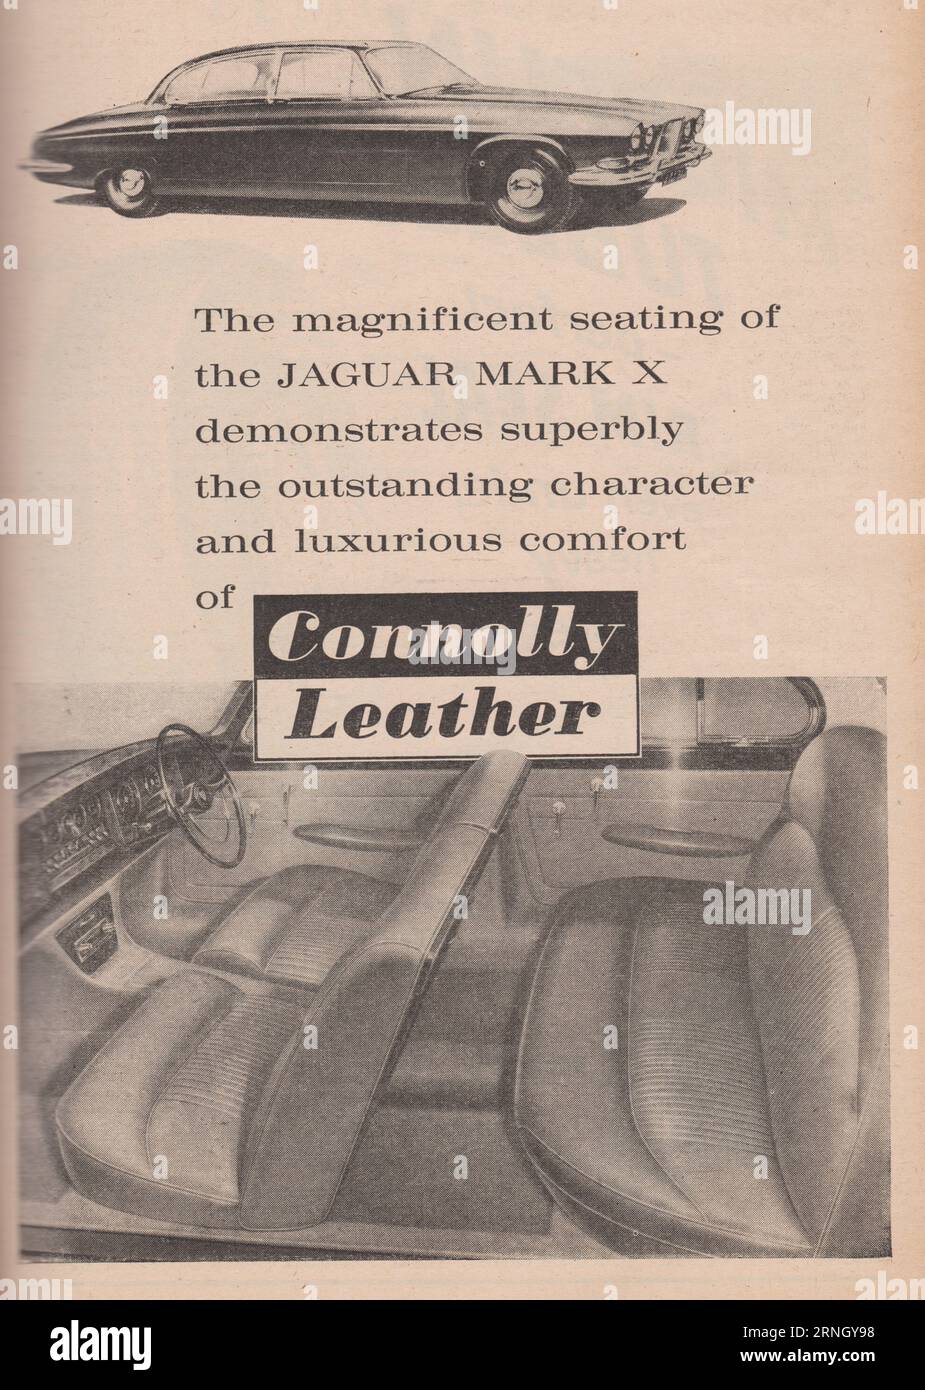 Connolly Leather vintage advert. Stock Photo